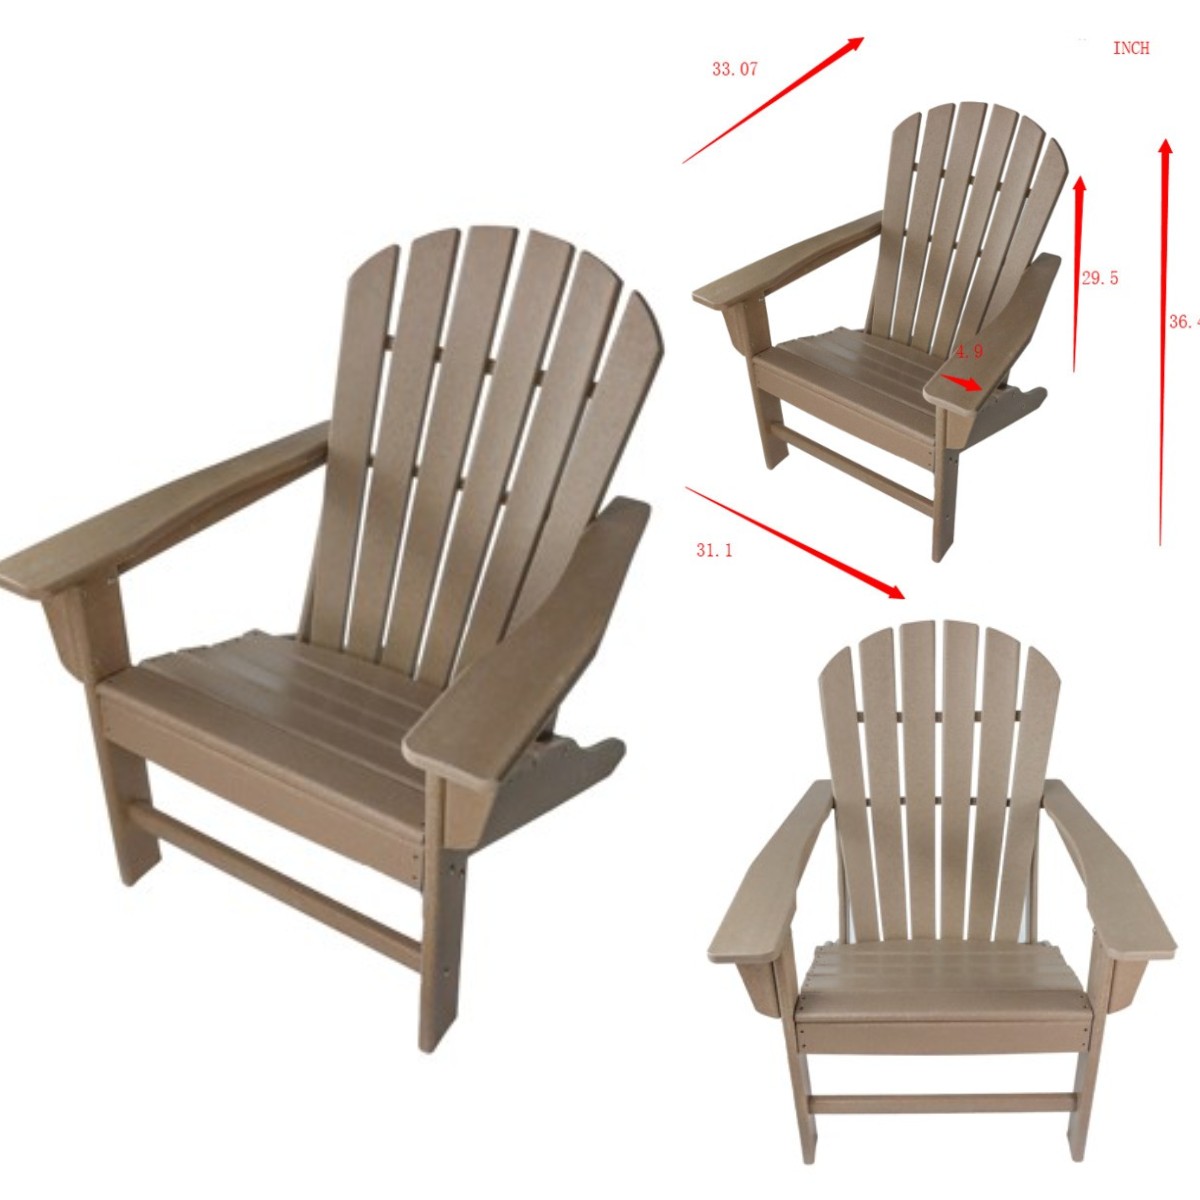 Folding Adirondack Chair Patio Chair Lawn Chair Outdoor 350 lbs Capacity Load Adirondack Chairs Weather Resistant for Patio Deck Garden 33.07*31.1*36.4" HDPE Resin Wood,Brown - image 4 of 8